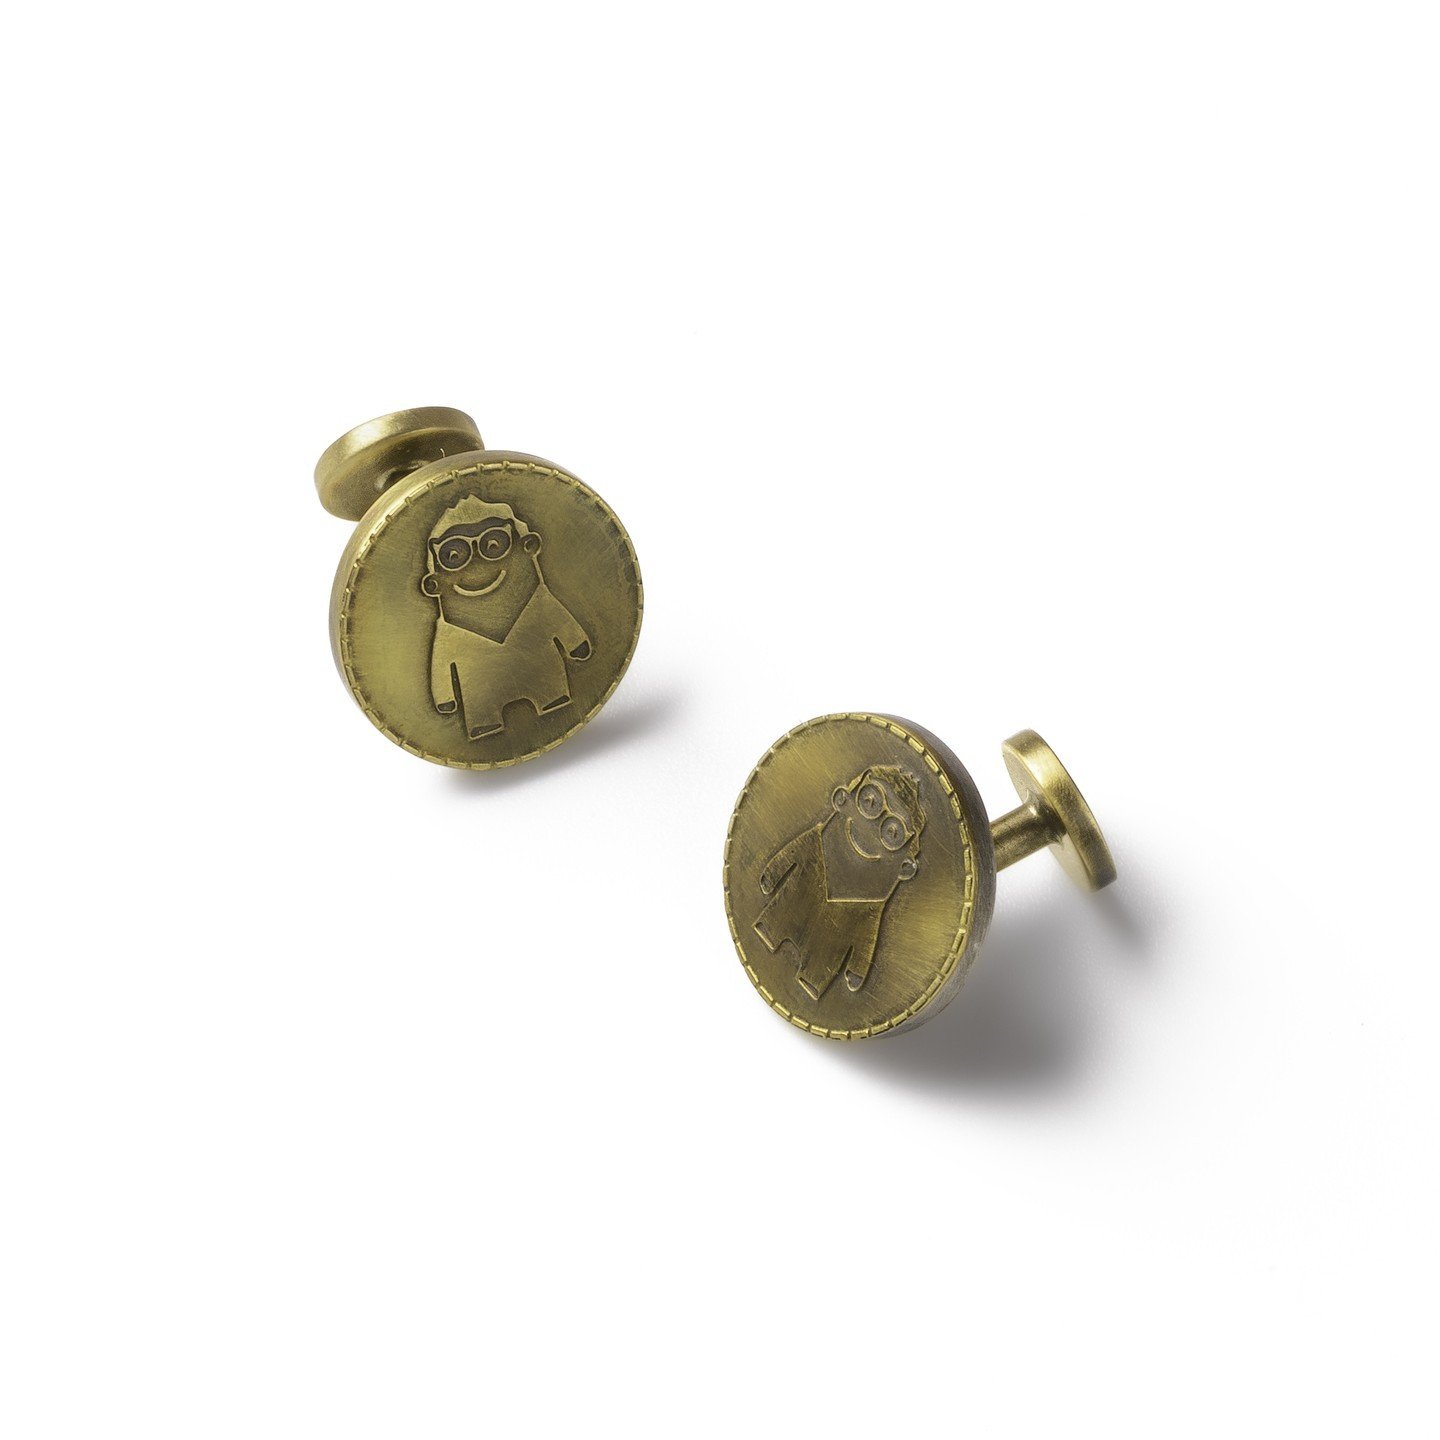 Discover cufflinks in three distinct types. Swipe to explore
Die Struck Cufflink: It's all about that pure metallic charm, with intricate designs stamped right on the metal.
Hard/Soft Enamel Cufflink: Get ready for some color! Choose between textured